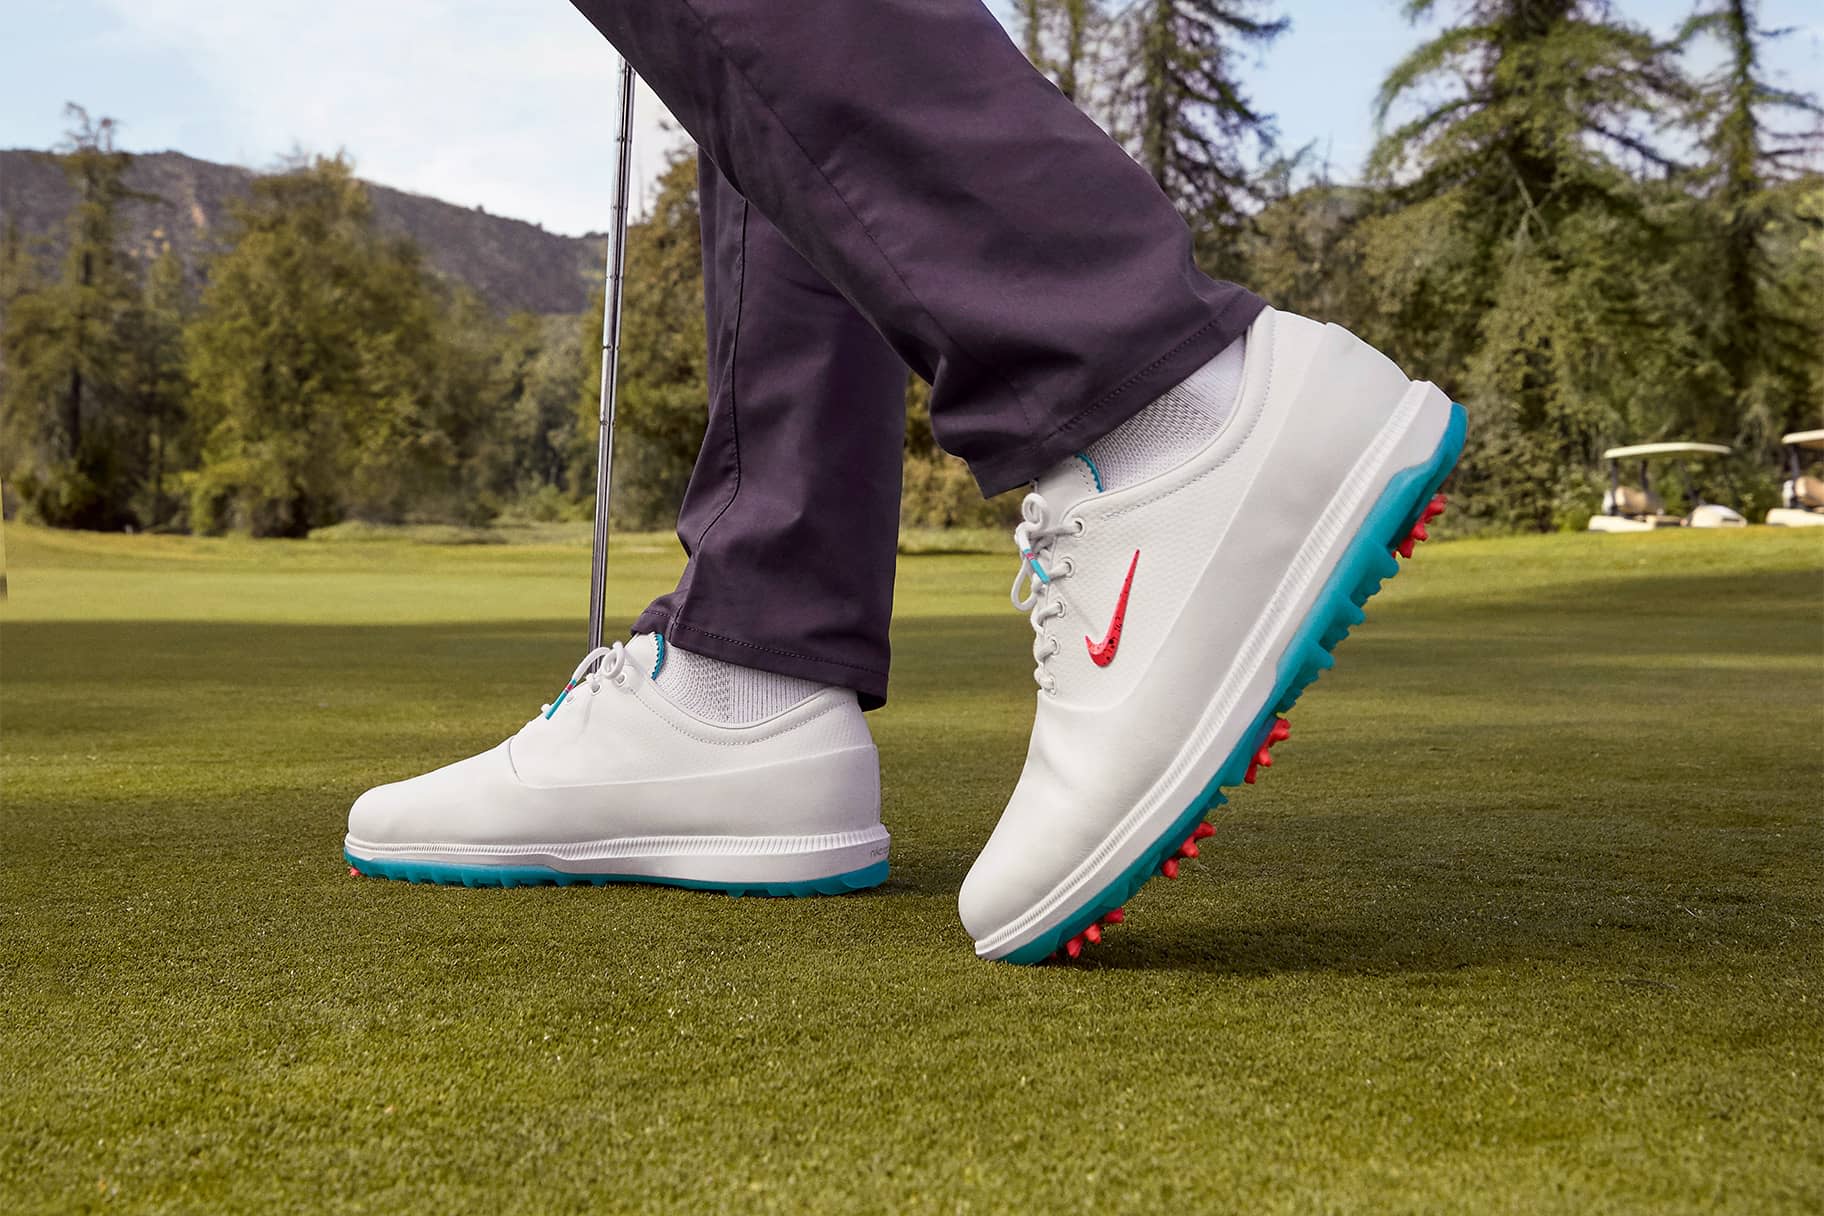 The Best Nike Golf Shoes for Traction, Stability and Comfort